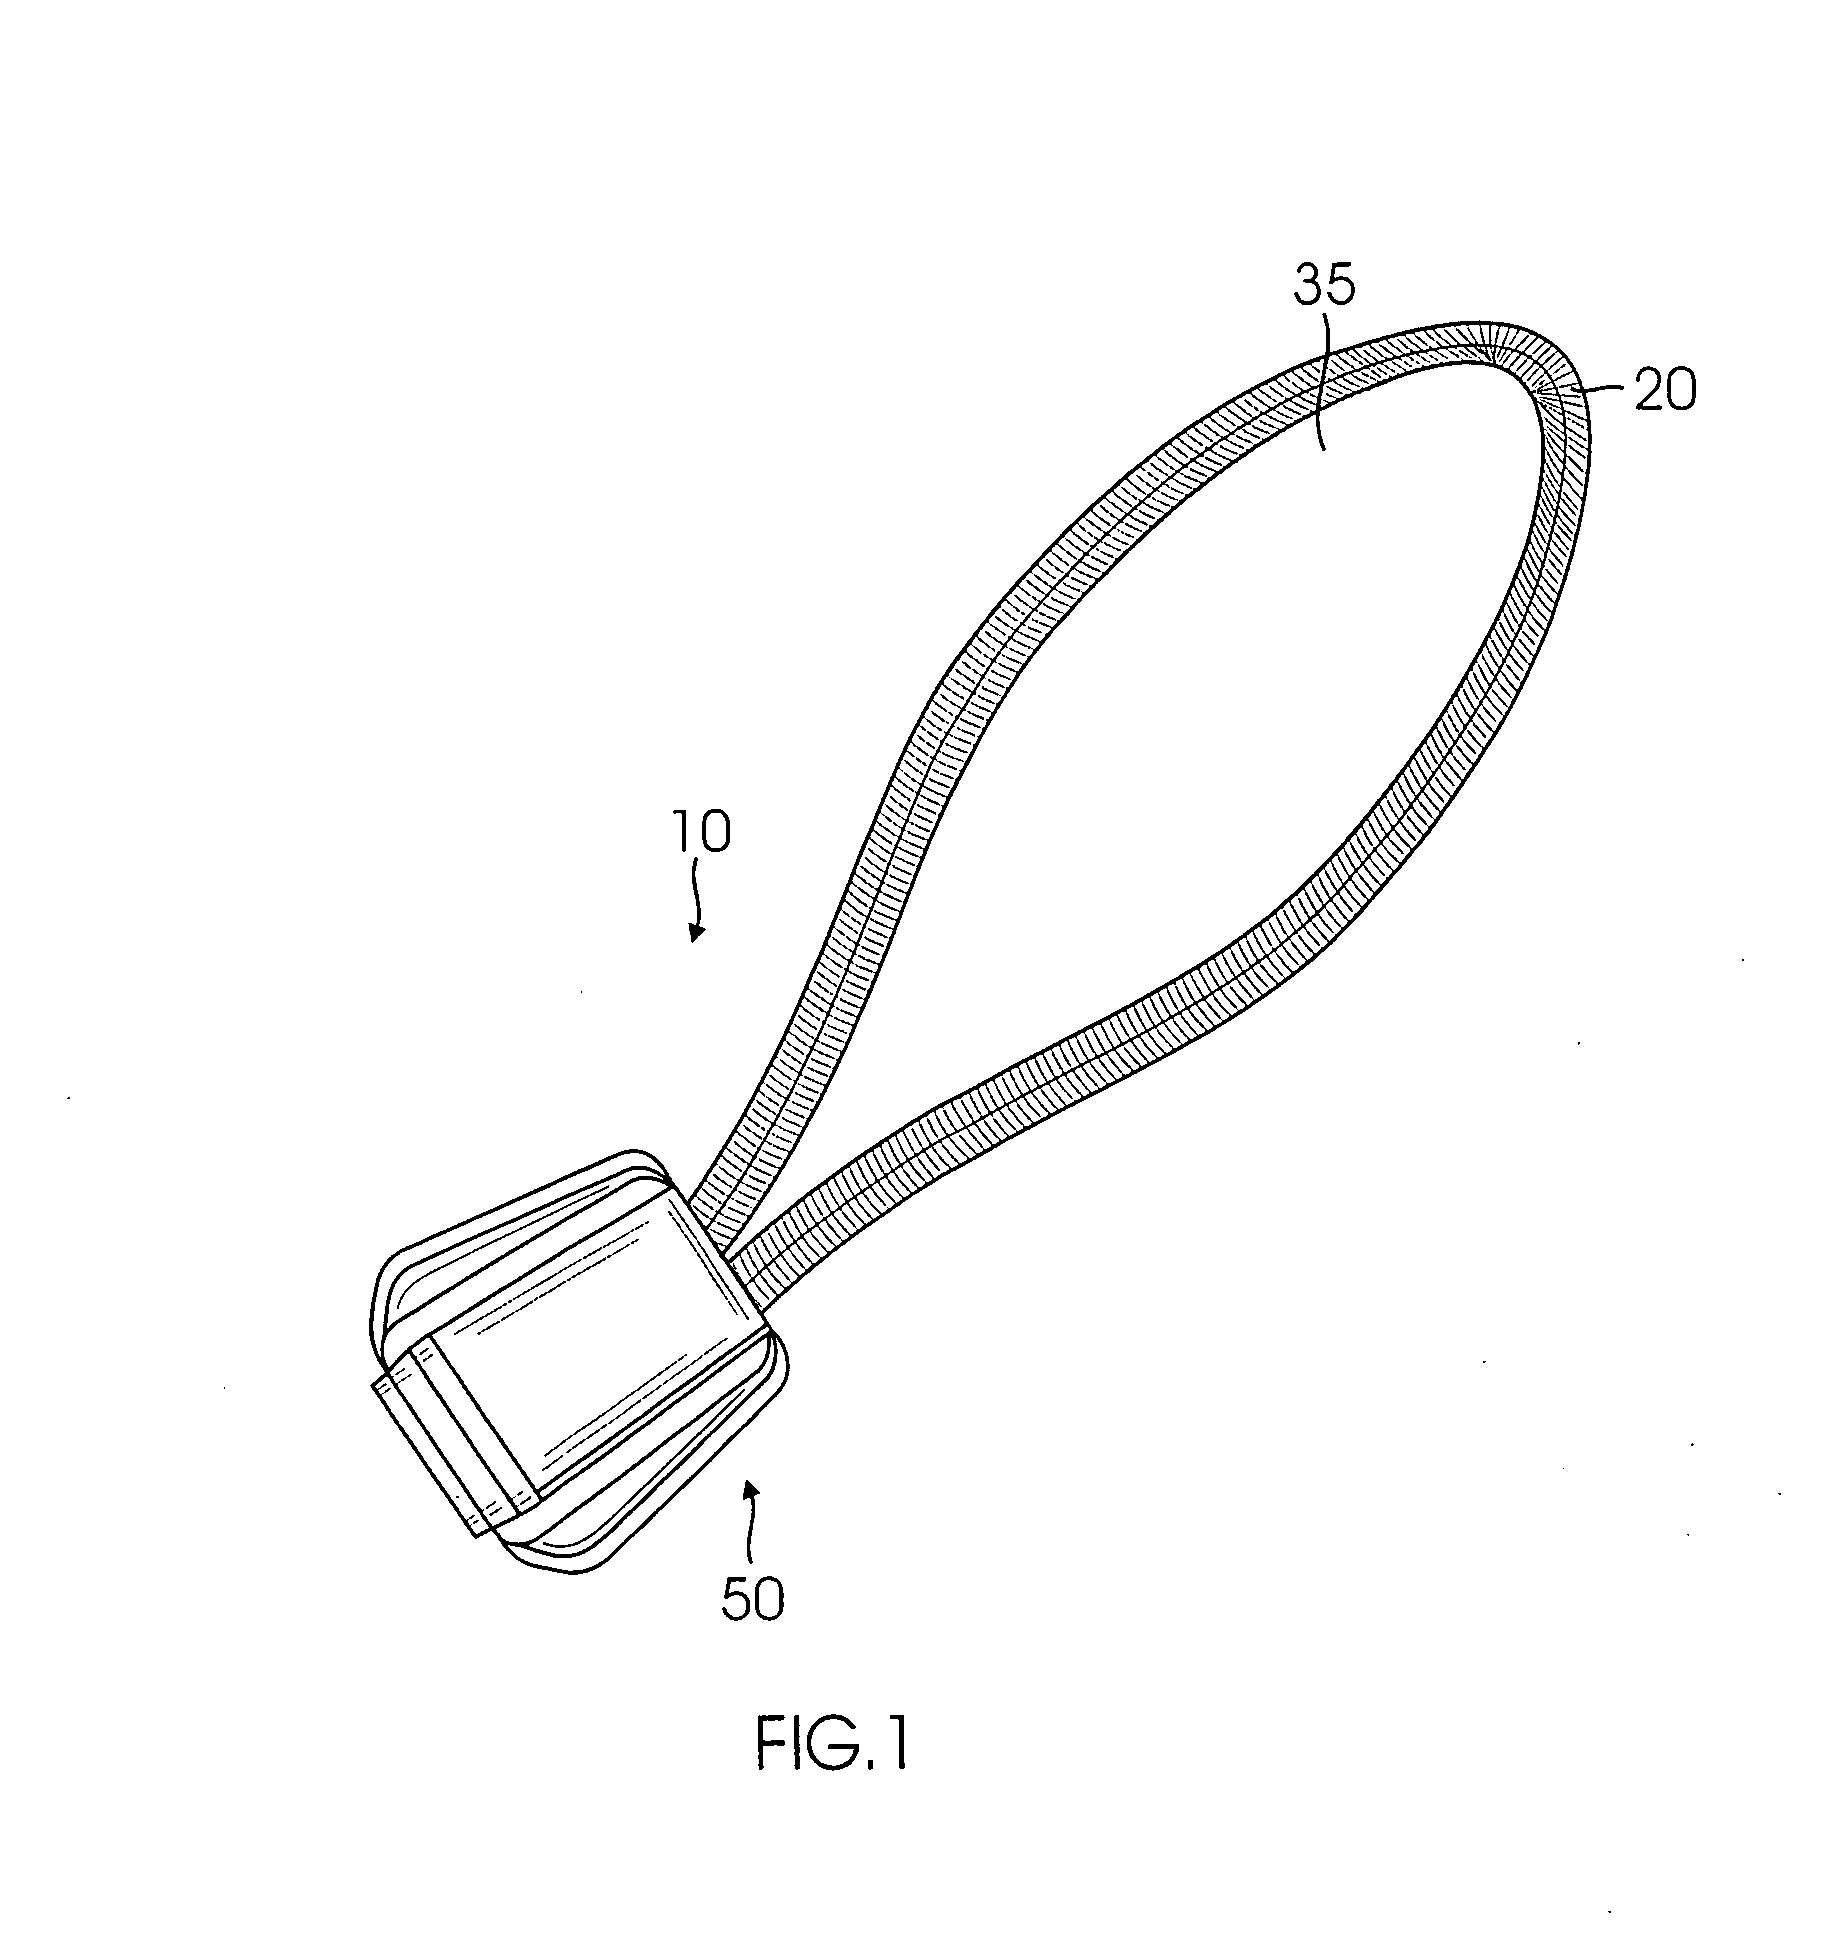 Apparatus to retain a coil wire from a microphone to prevent the microphone from falling away from a person